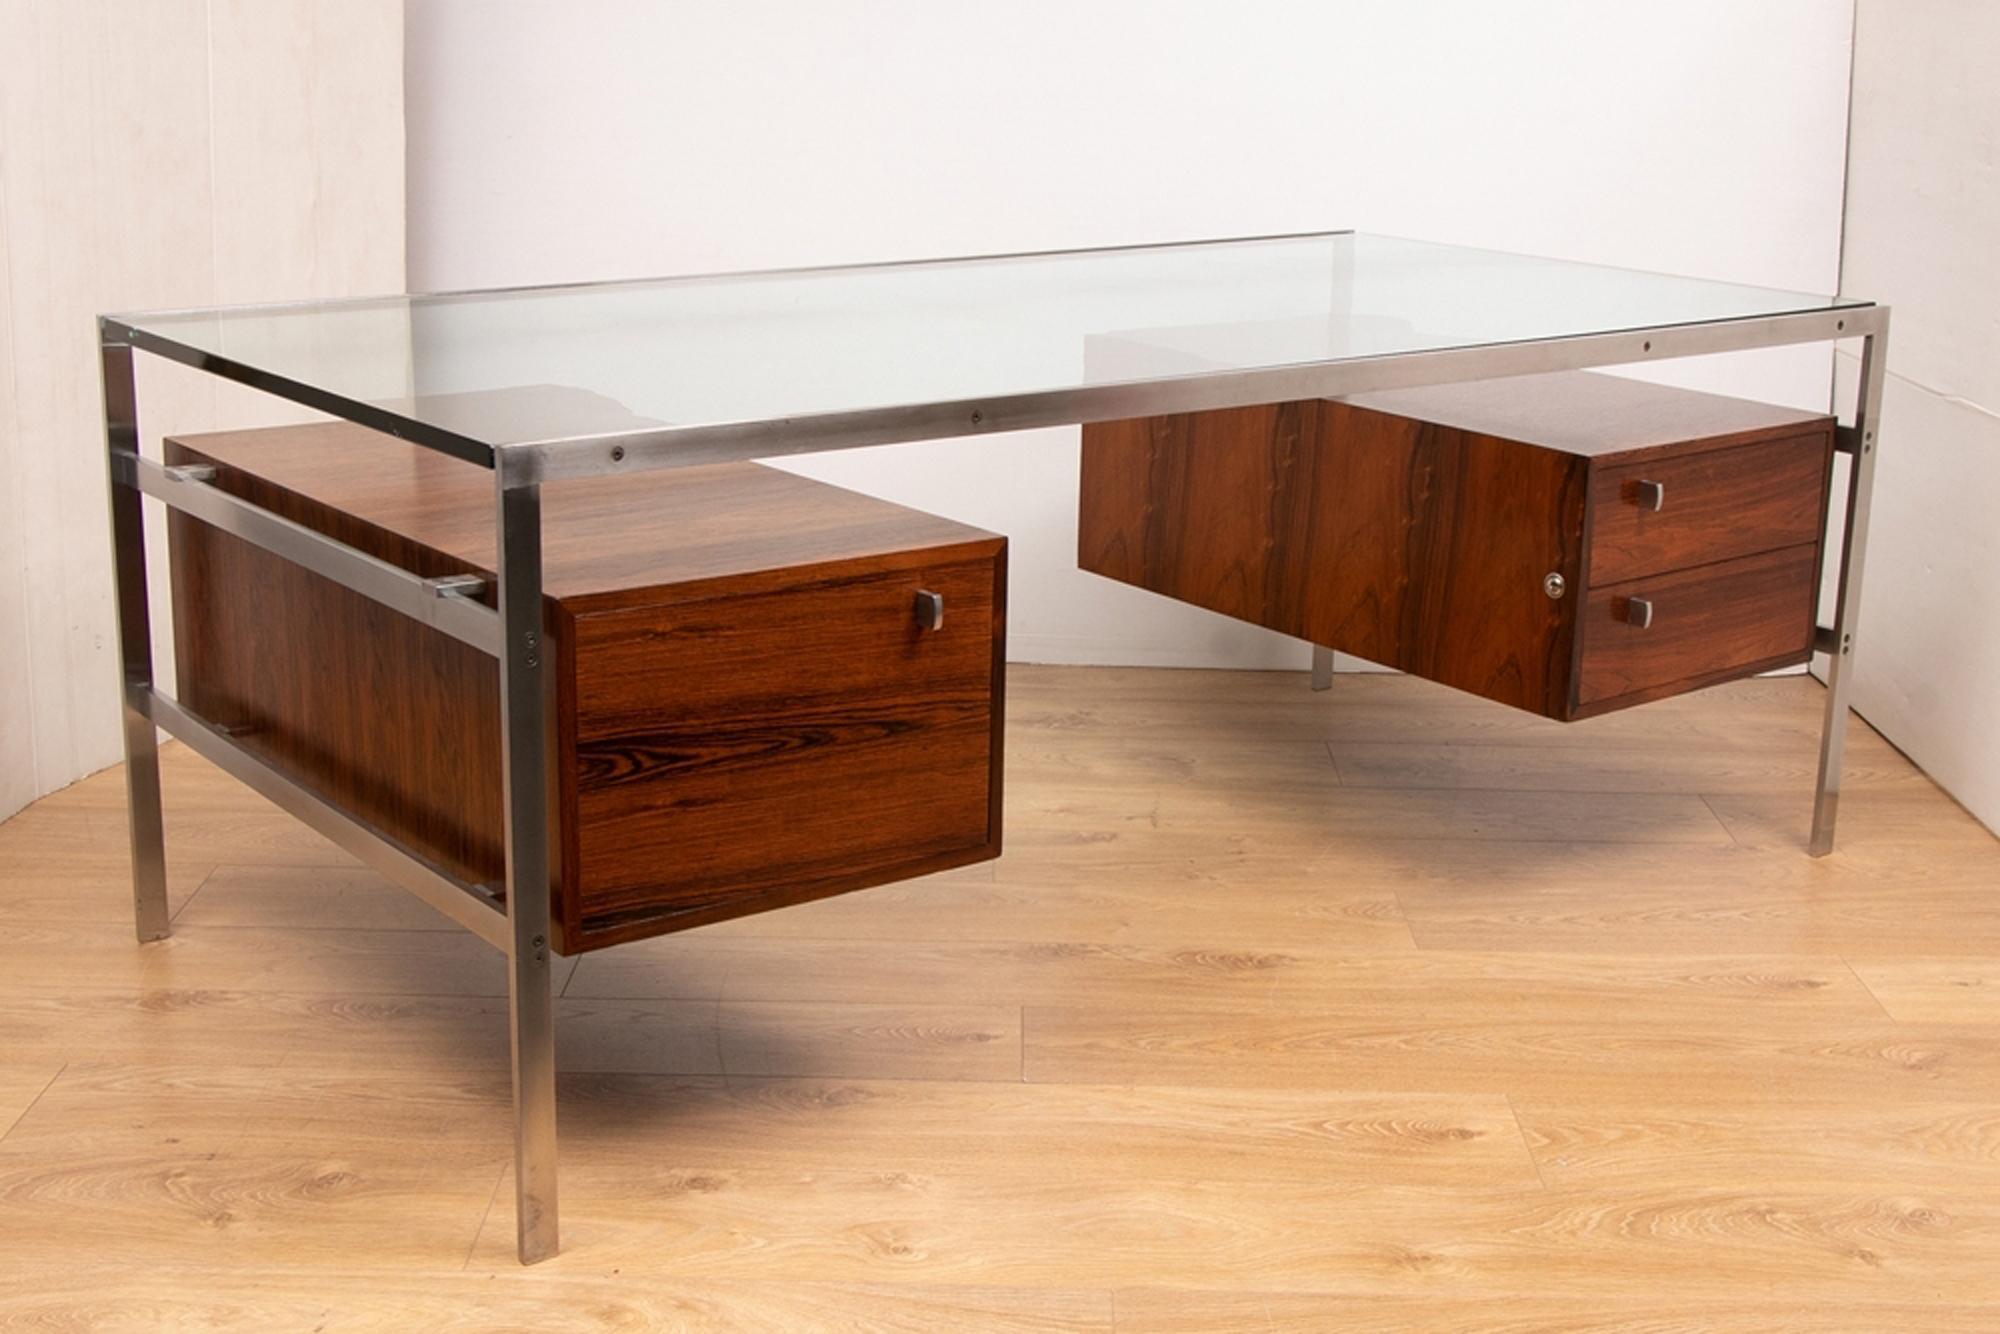 A midcentury model BO 555 glass, rosewood and metal desk designed by Preben Fabricius and Jorgen Kastholm. The desk features a brushed metal frame, glass top and three rosewood drawers.